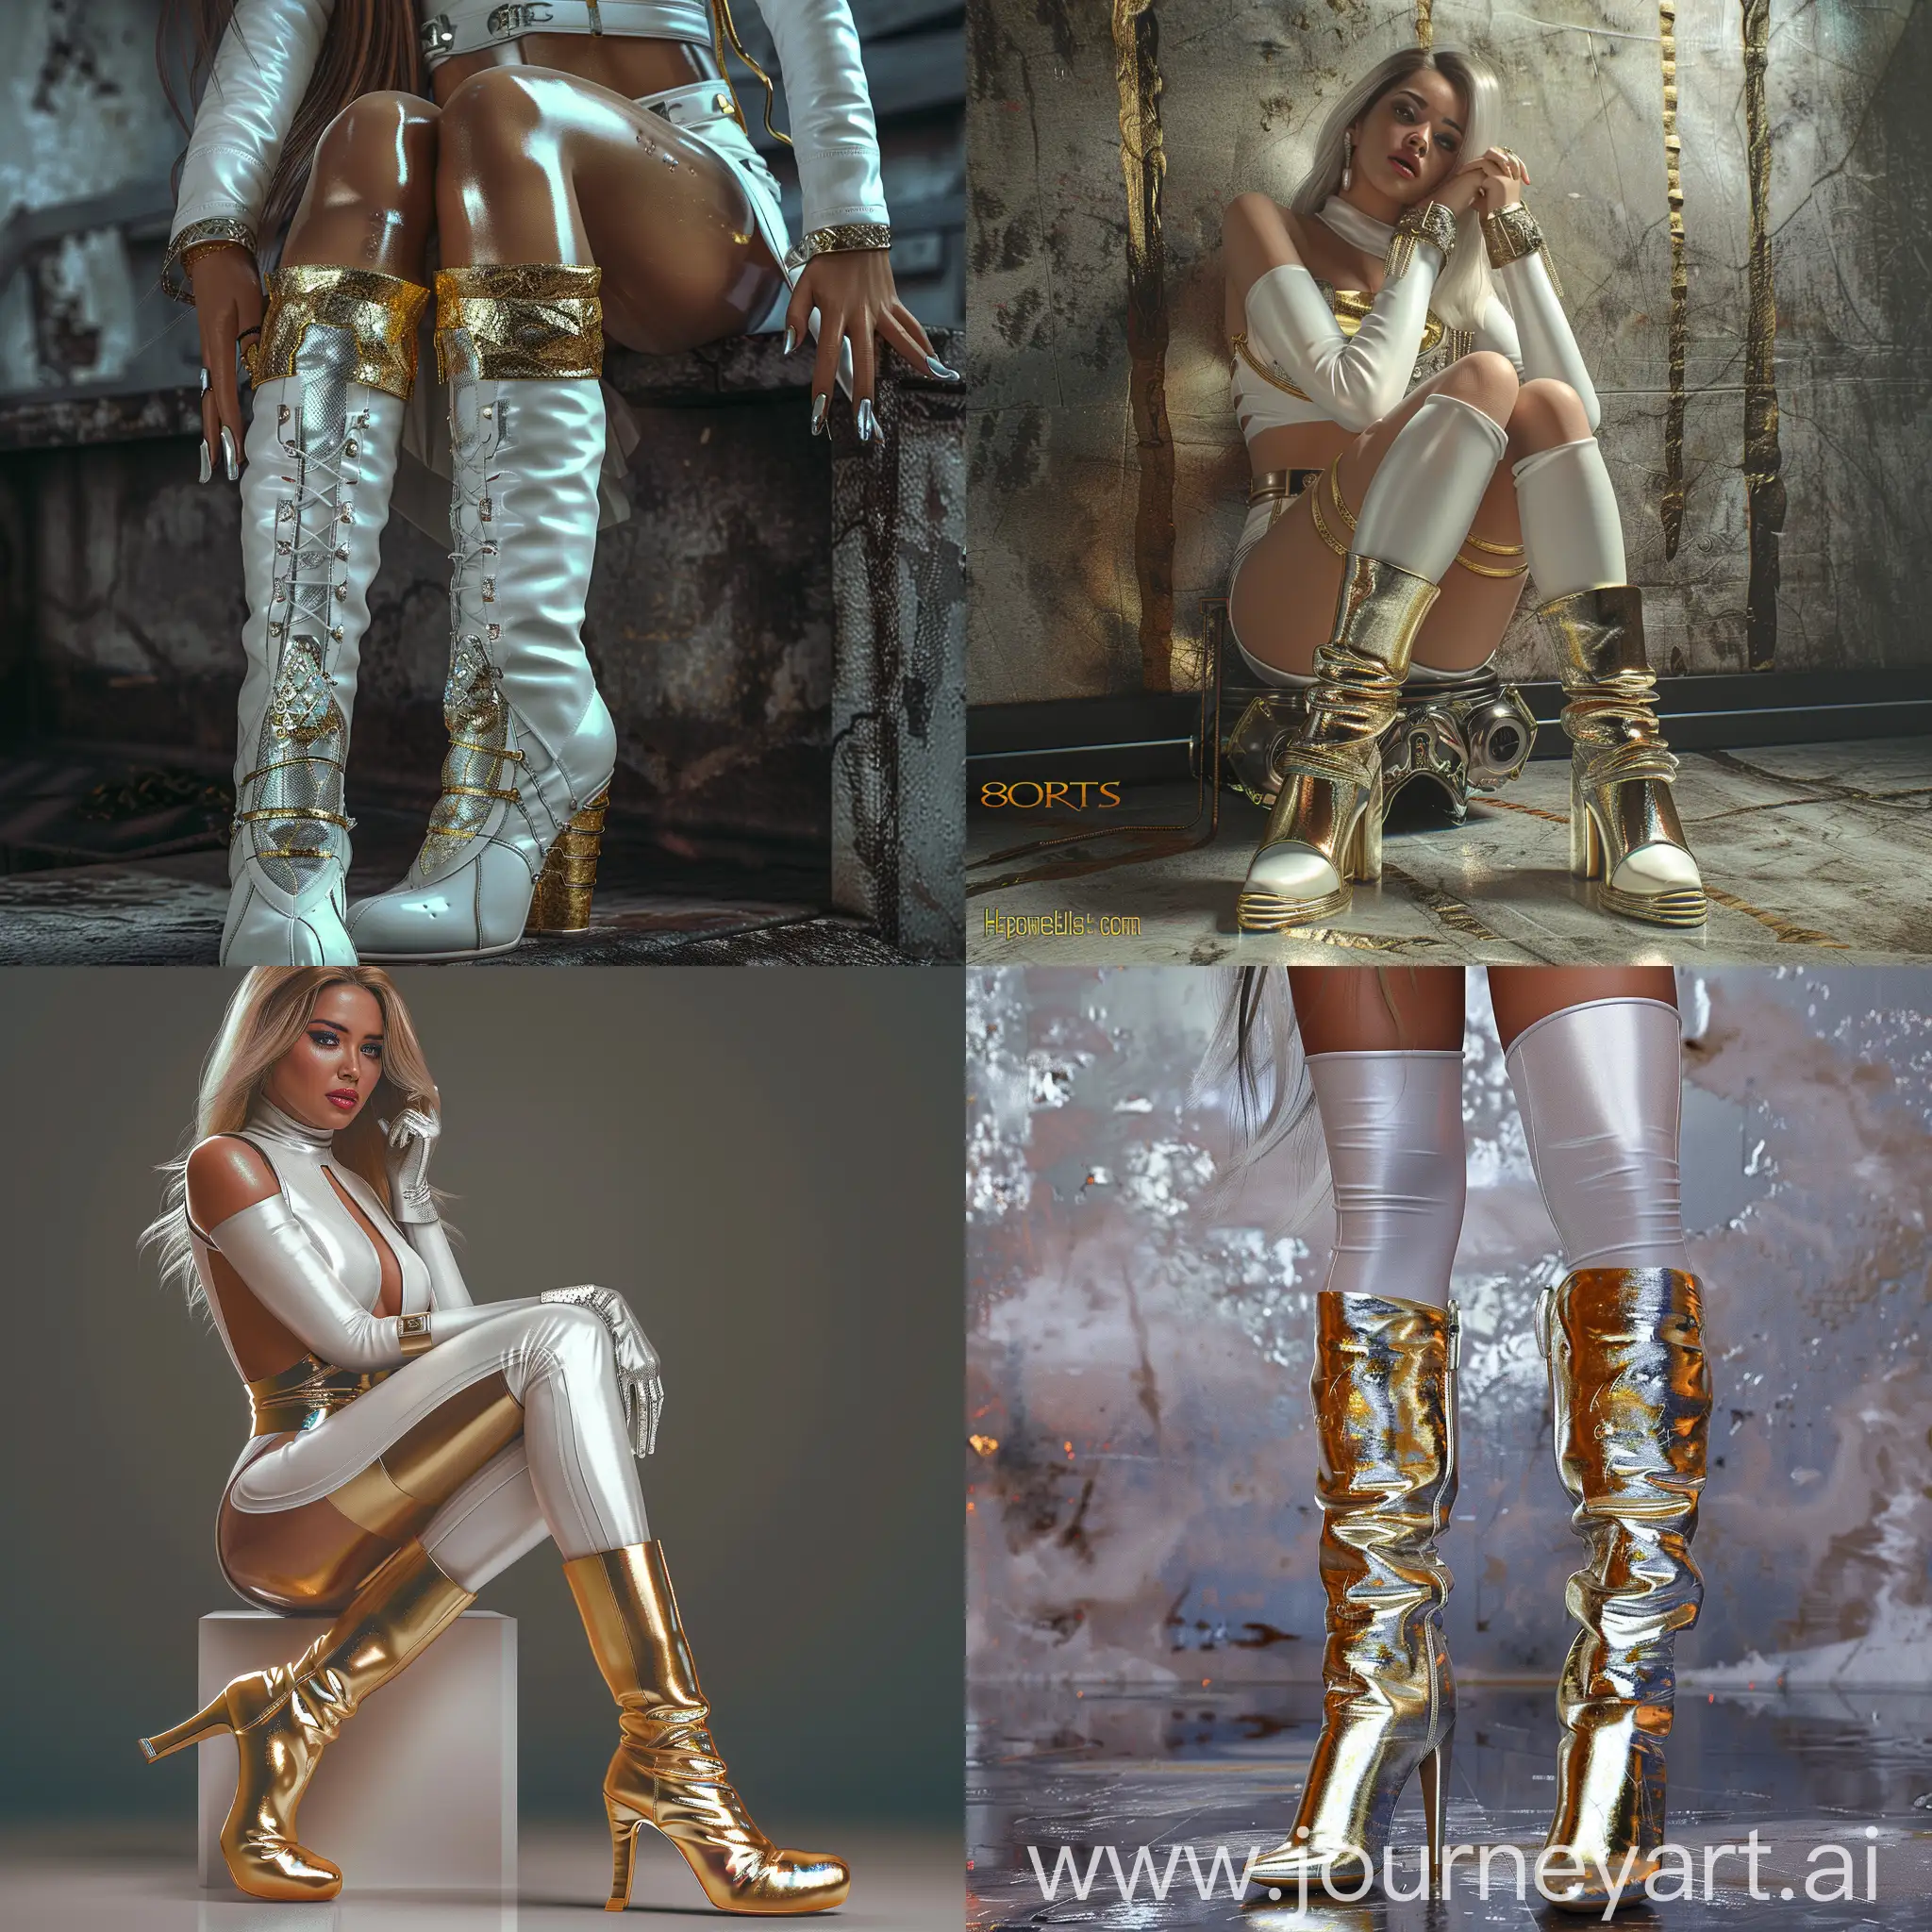 Fantasy-Woman-in-White-Latex-and-Metallic-Boots-Surrealistic-Fractal-Art